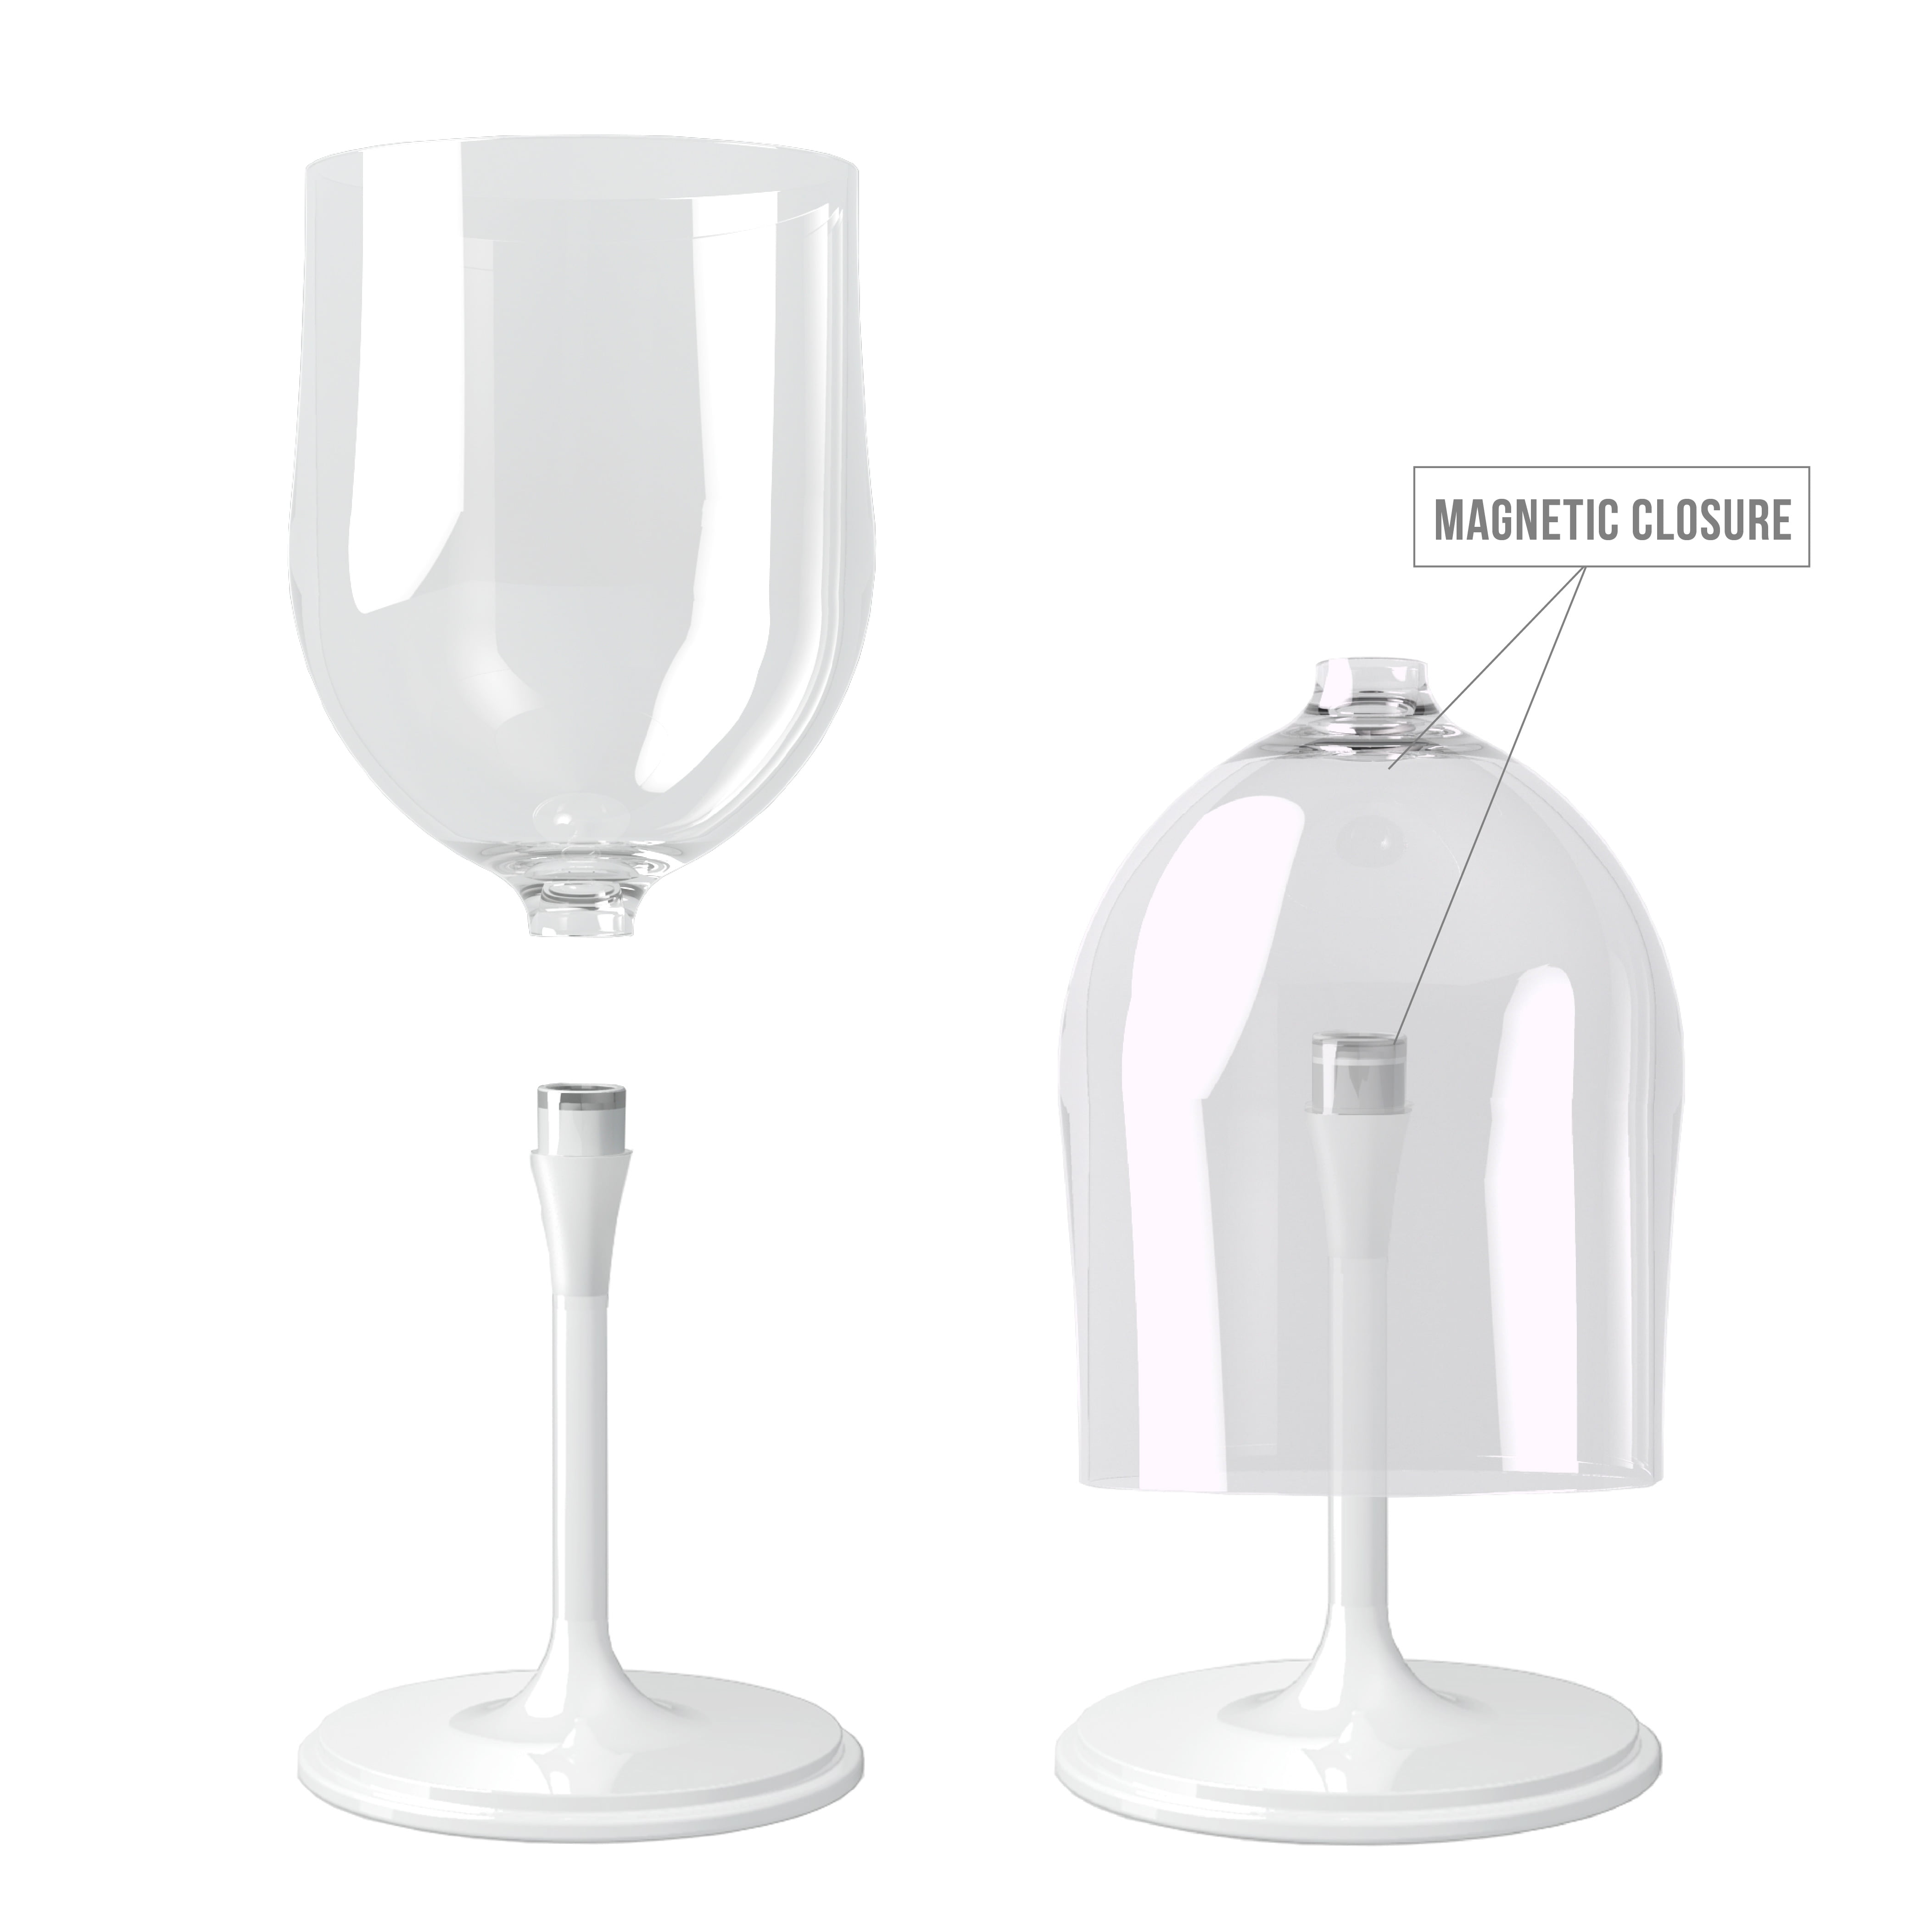 Transparent Portable Collapsible Wine Glass | Unbreakable, Shatterproof Clear Plastic Wine Glass | BPA Free, Dishwasher Safe, Detachable Stem Wine